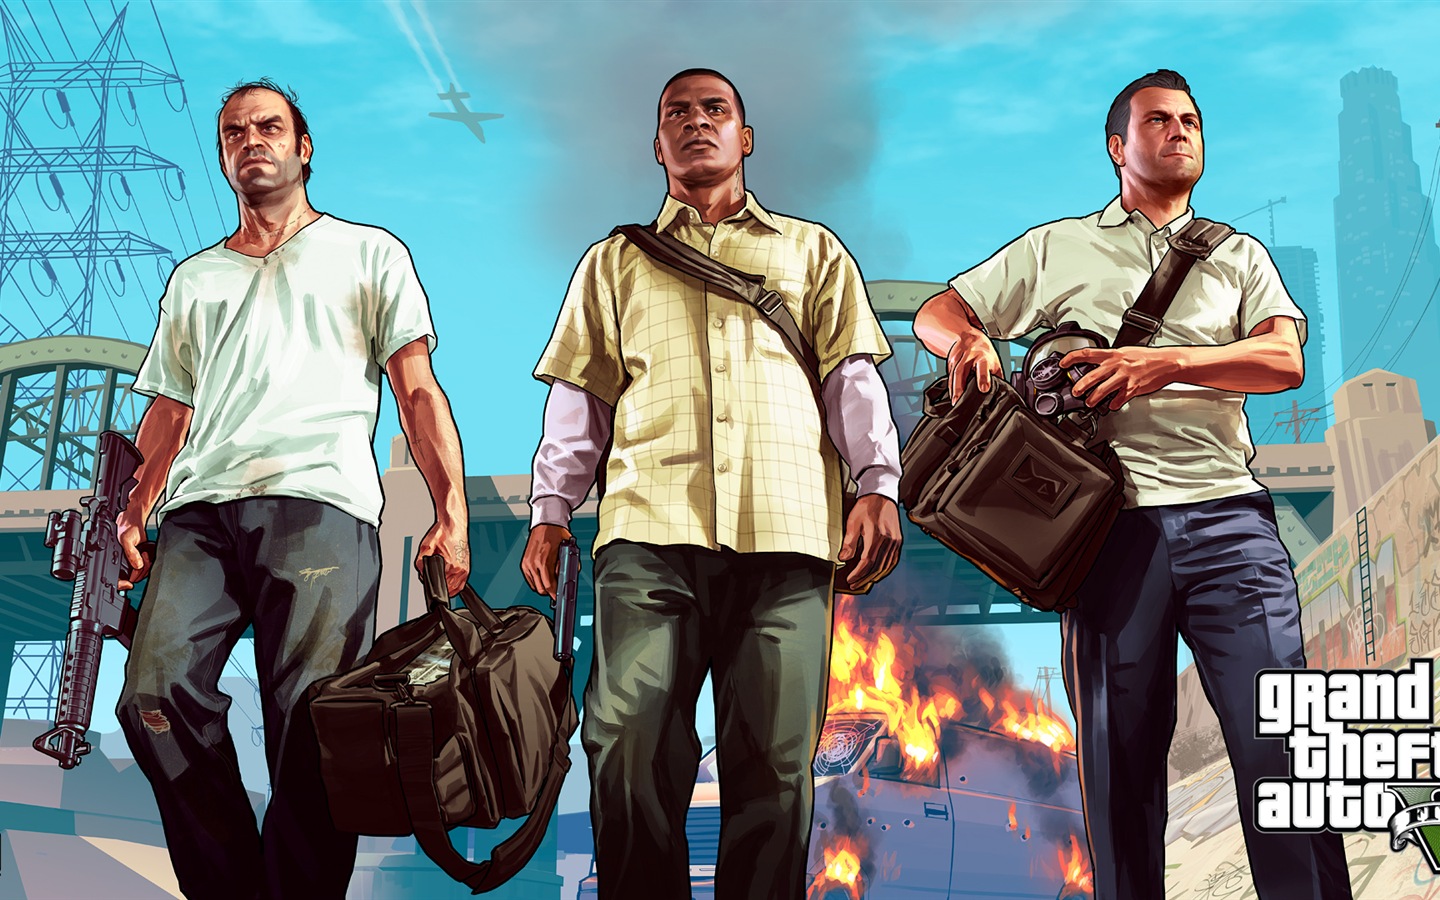 Grand Theft Auto V GTA 5 HD game wallpapers #1 - 1440x900